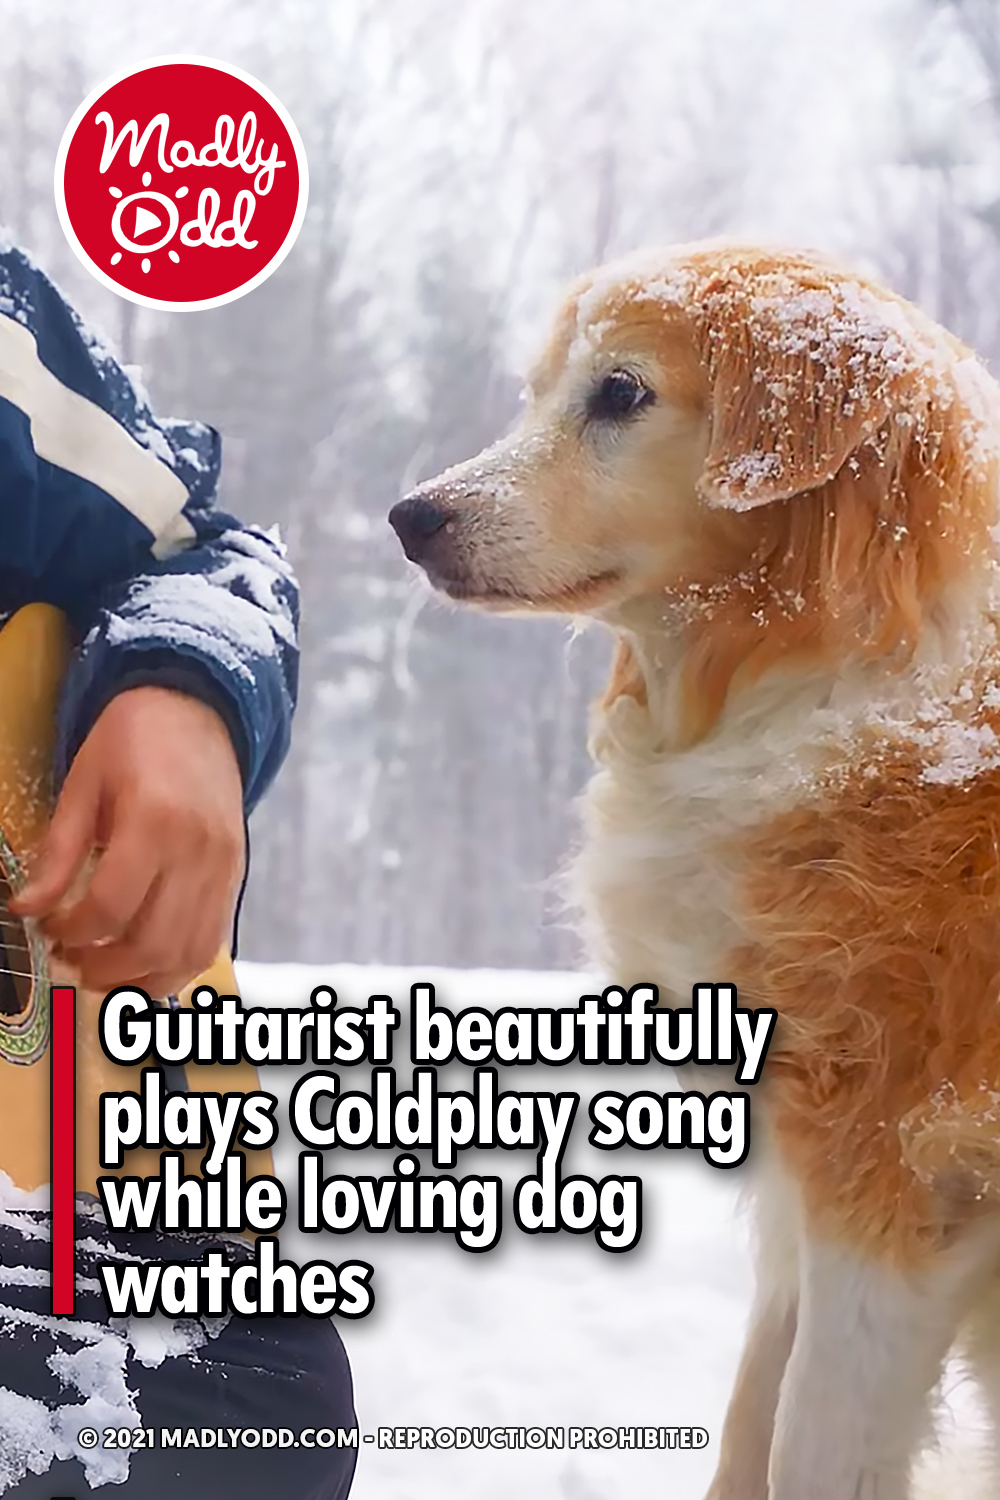 Guitarist beautifully plays Coldplay song while loving dog watches